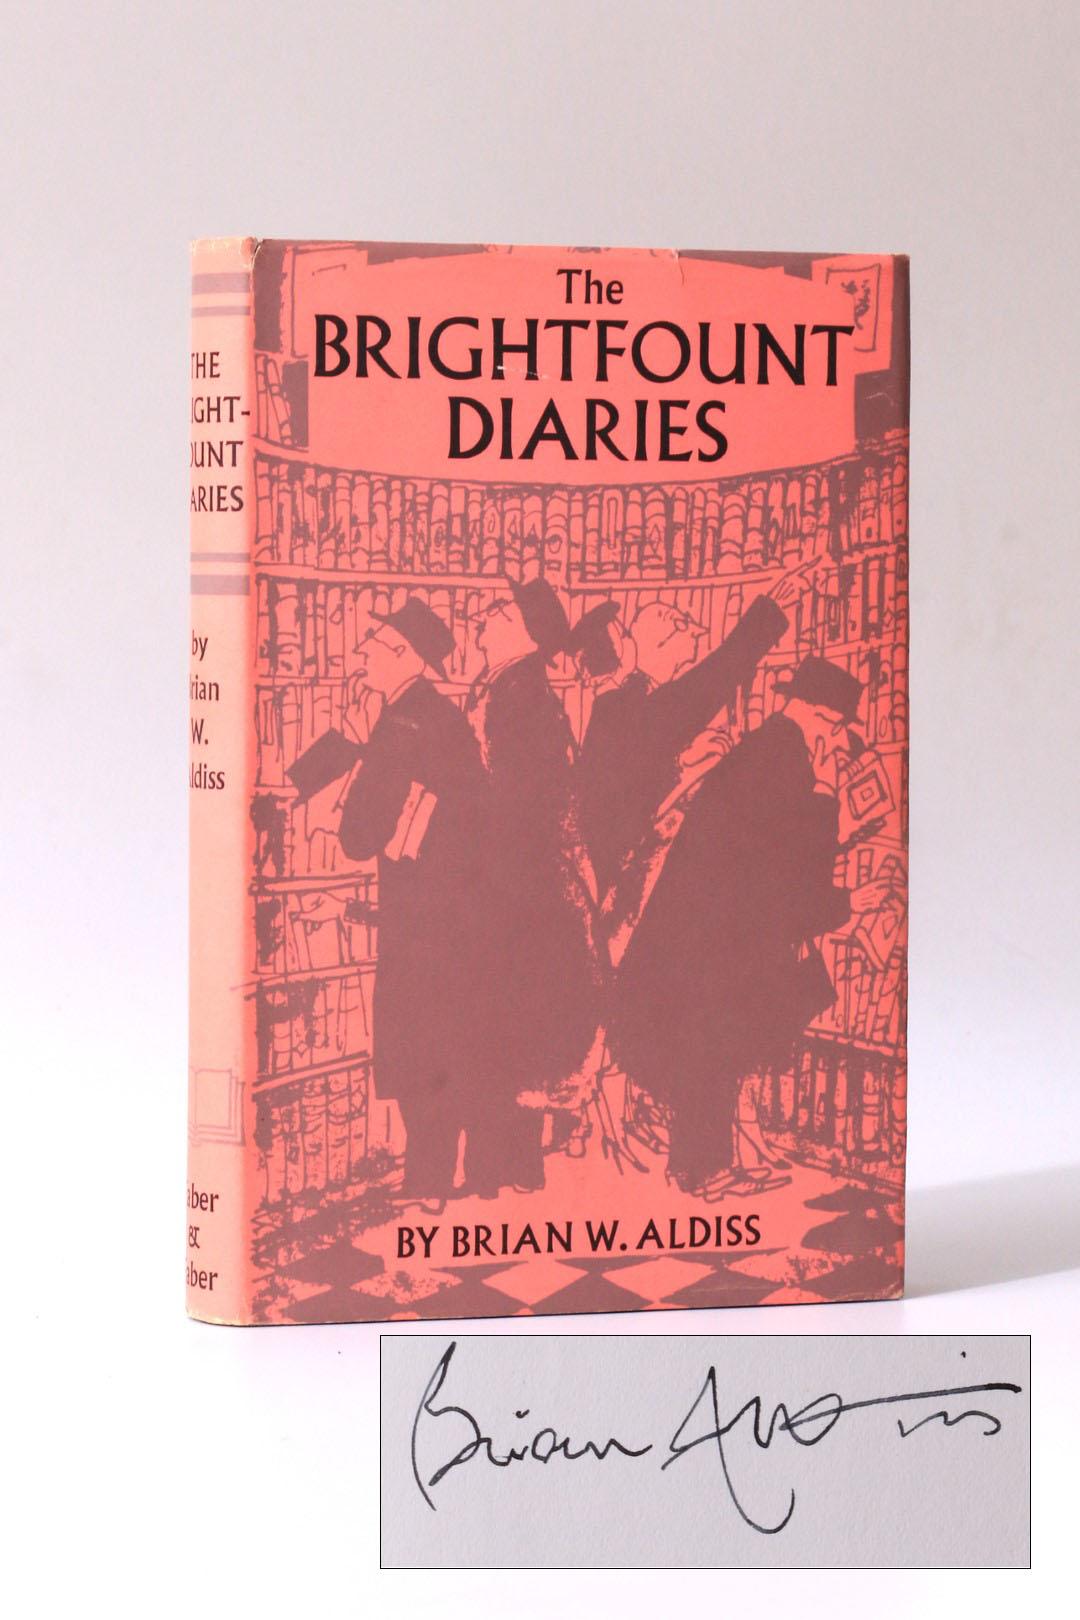 Brian W. Aldiss - The Brightfount Diaries - Faber, 1955, Signed First Edition.